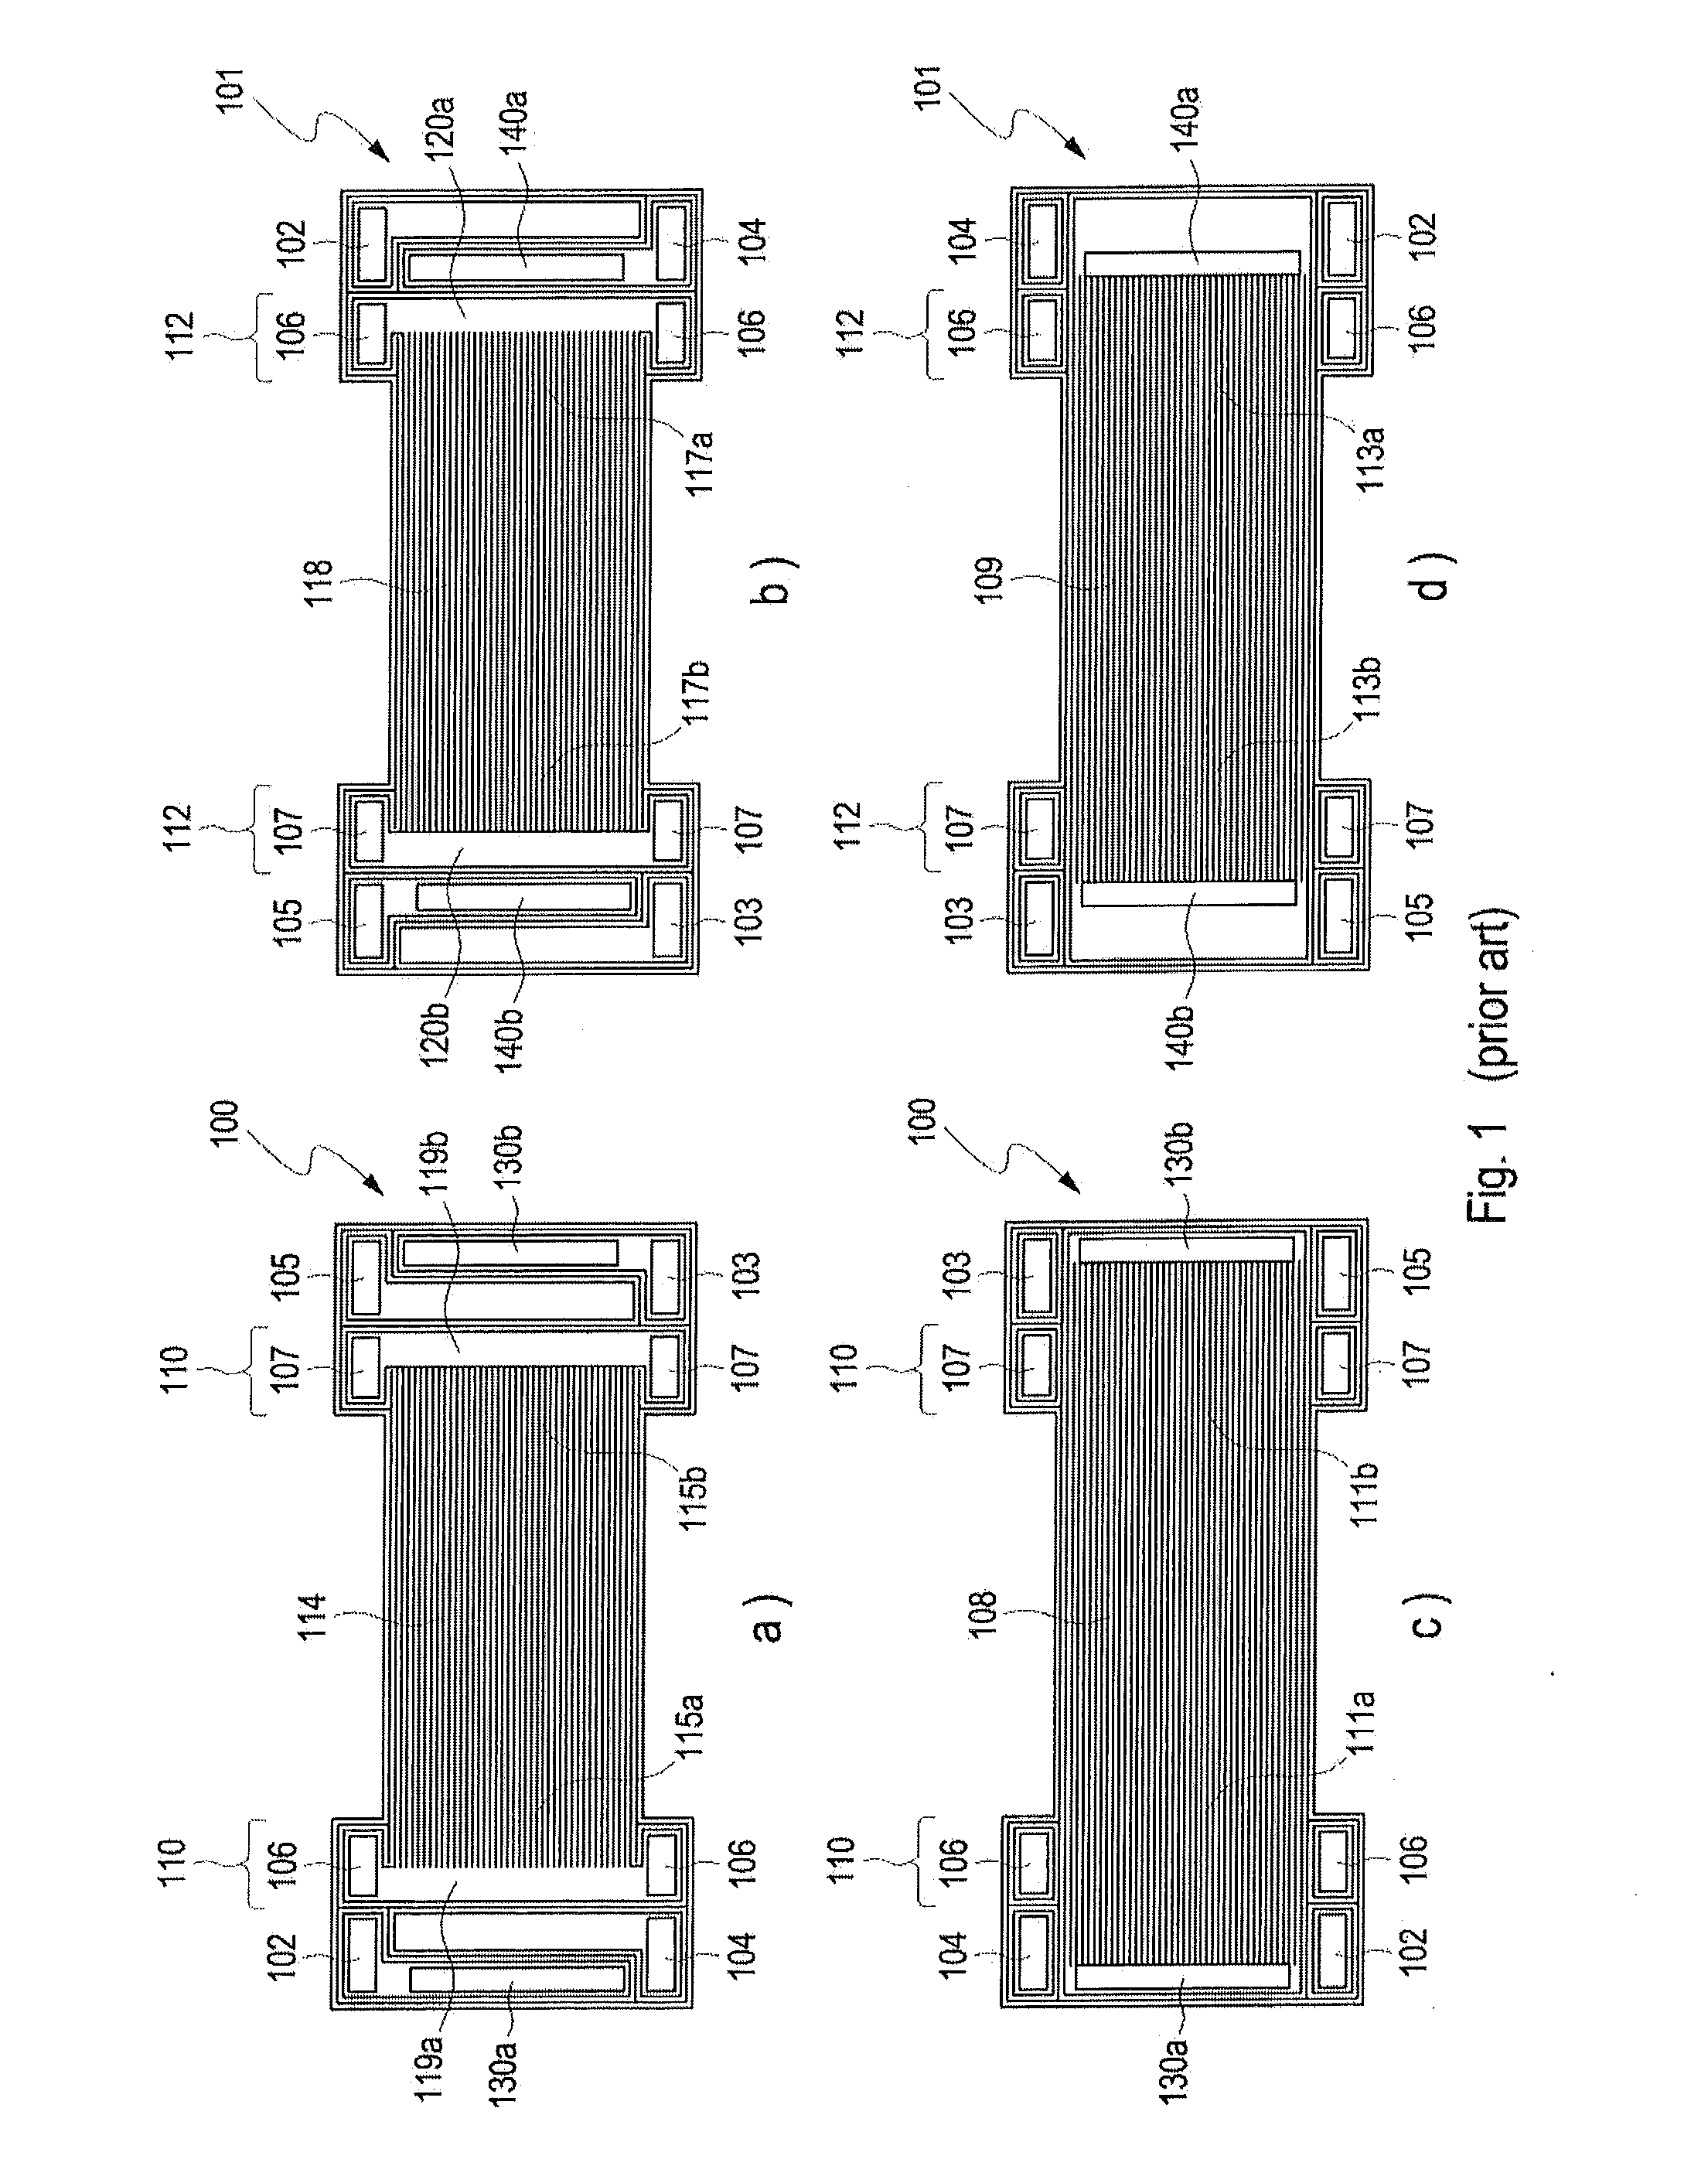 Flow field plate for improved coolant flow